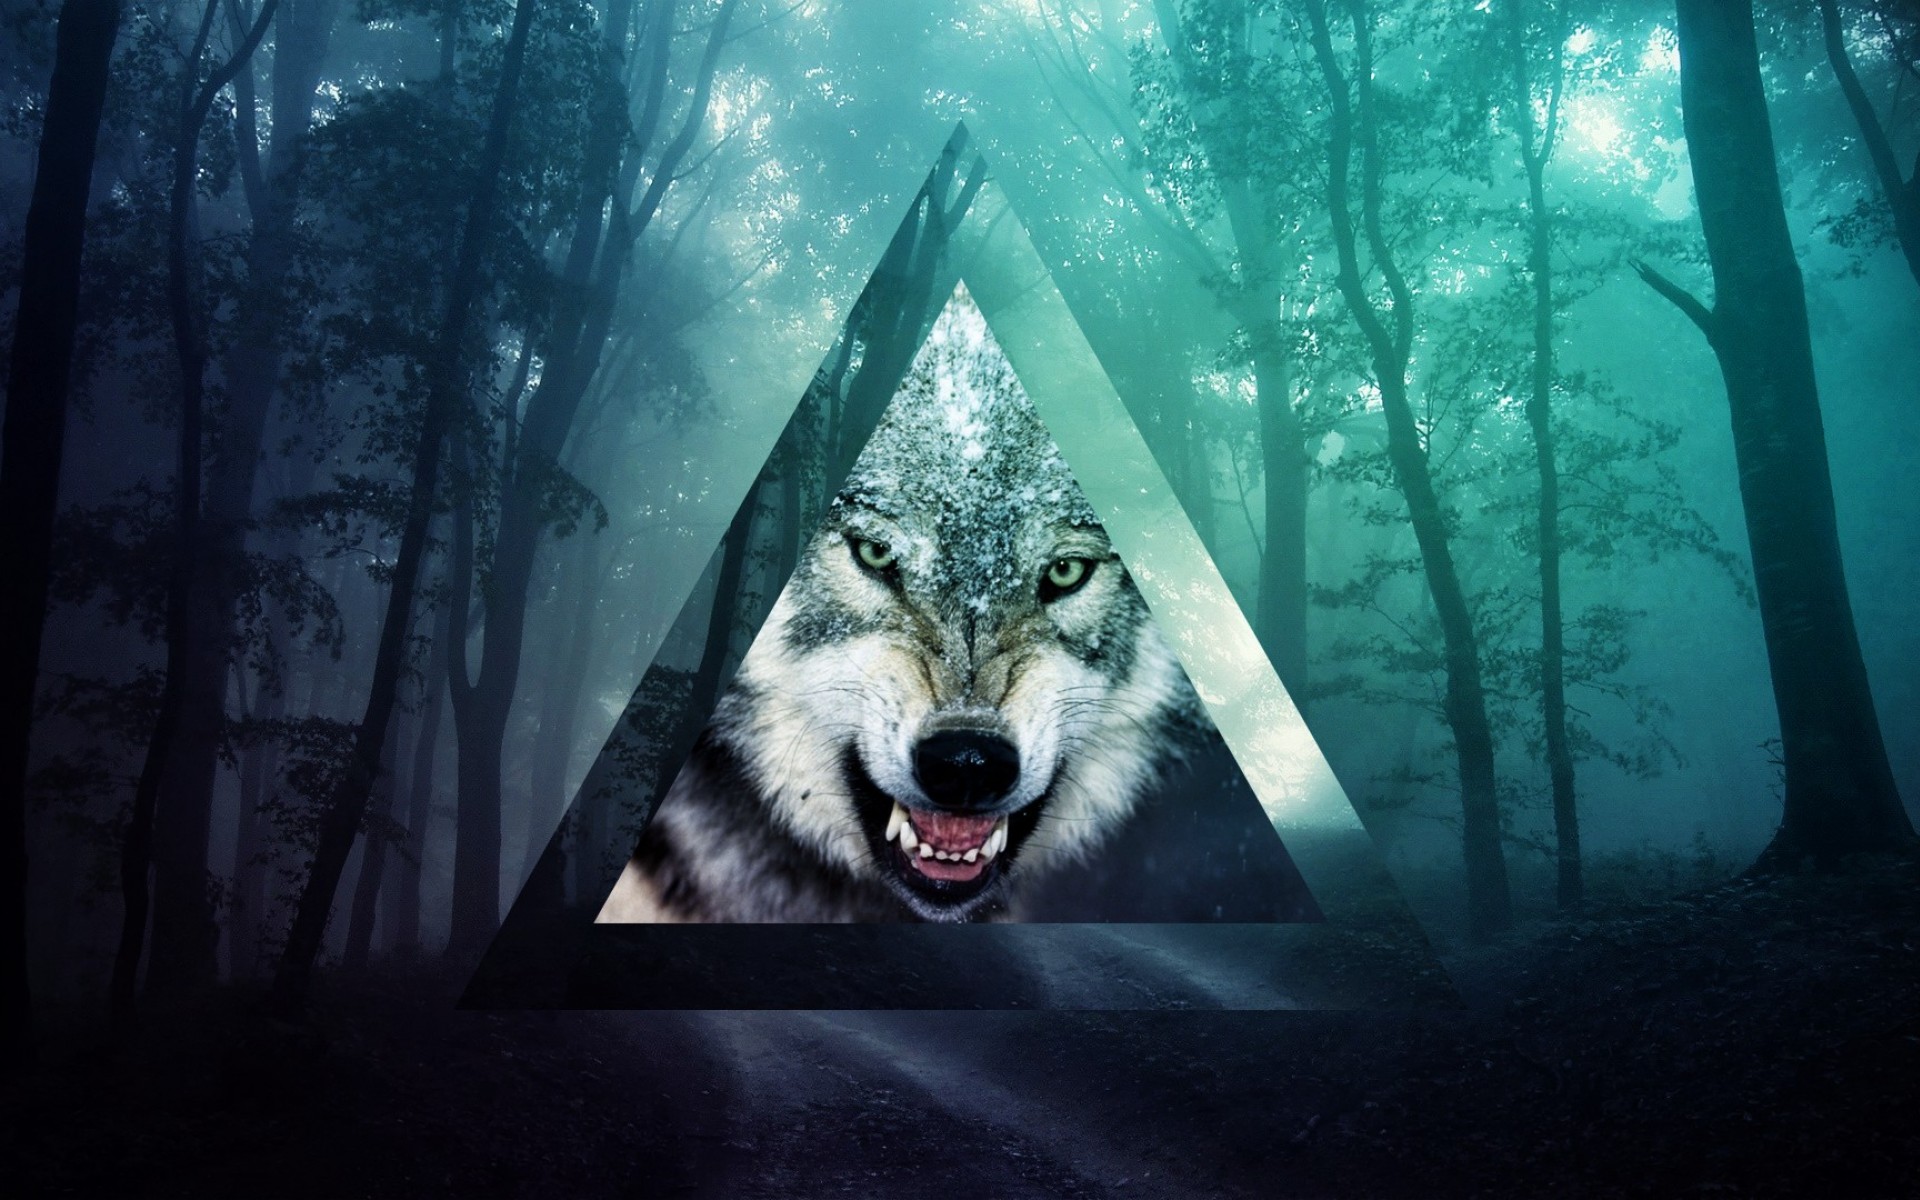 hipster wolf triangle